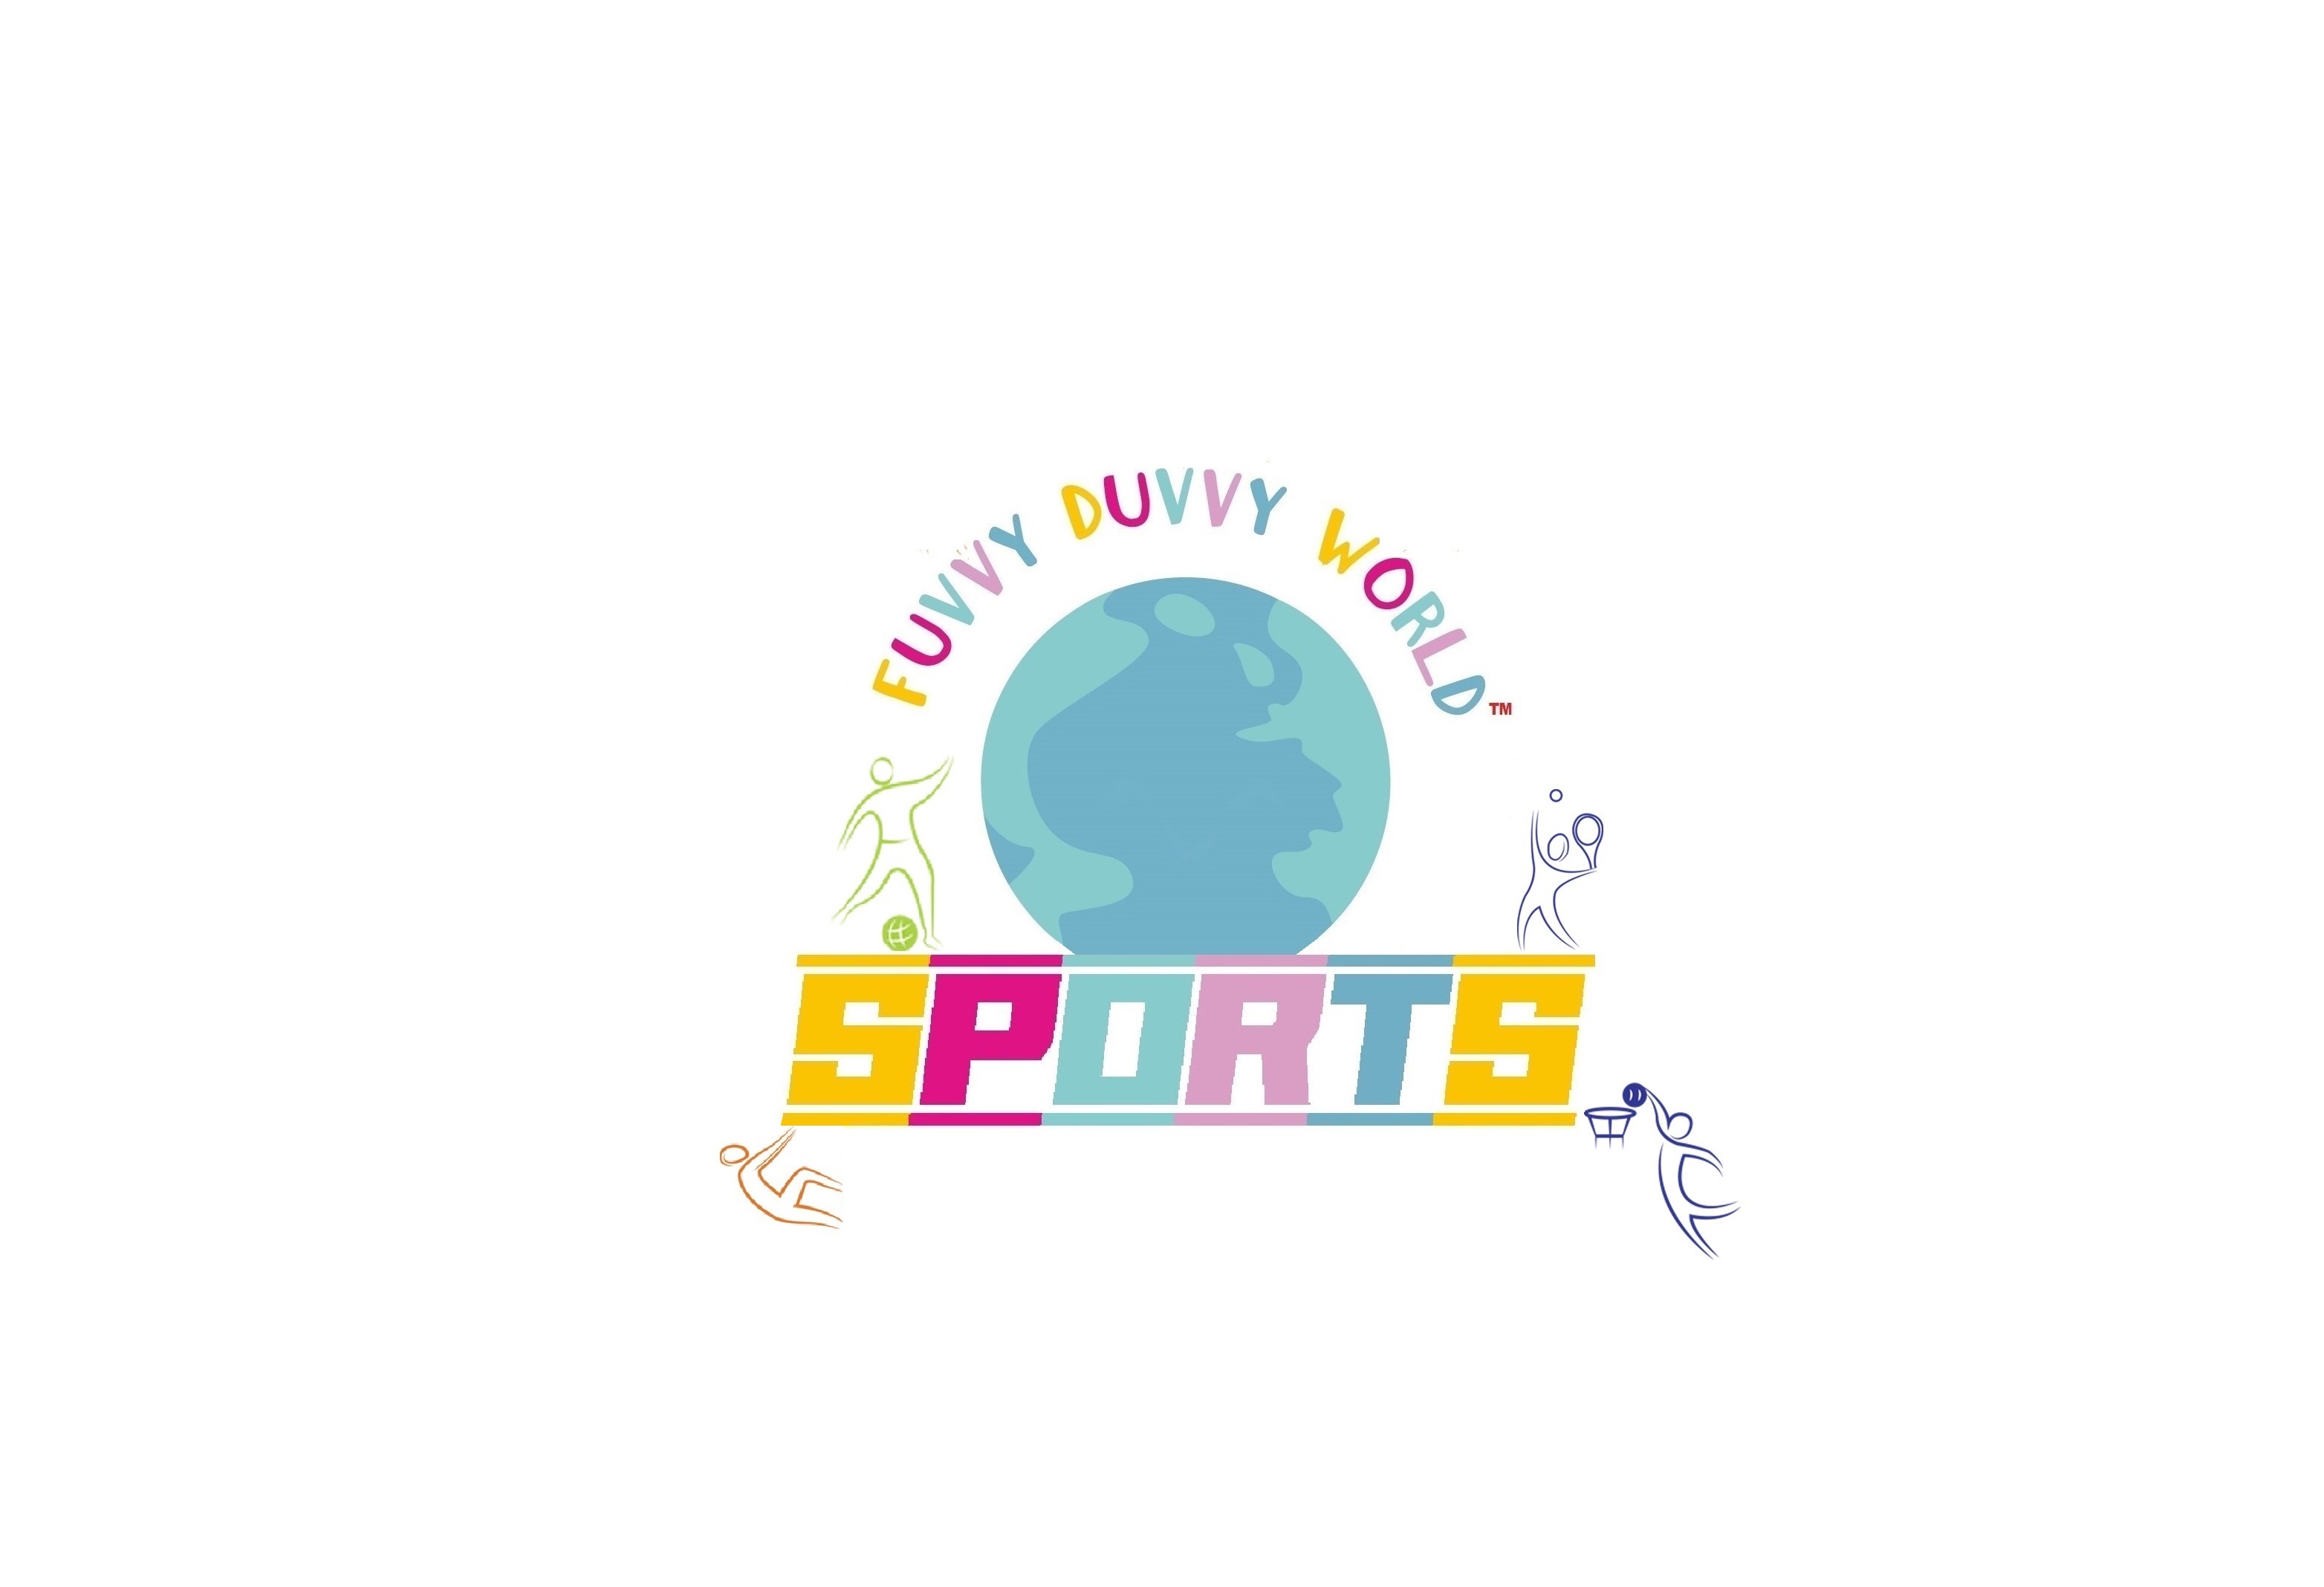 Logo of FUVVY DUVVY WORLD SPORTS Sports And Recreation In London, Greater London